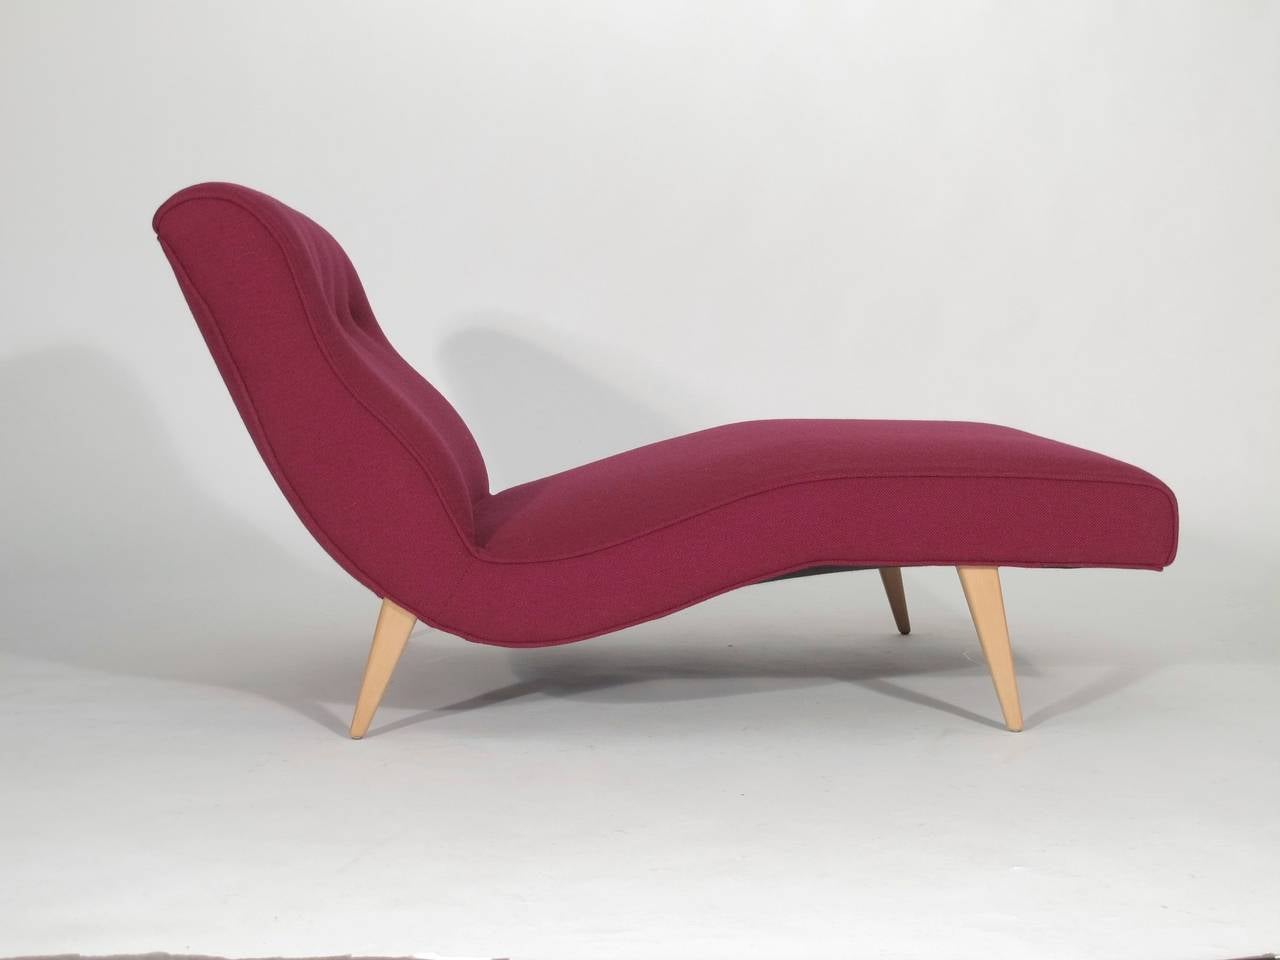 Chaise lounge crafted of solid wood frame and raised on tapered maple legs, newly upholstered in magenta/burgundy wool textile with button tufted back.